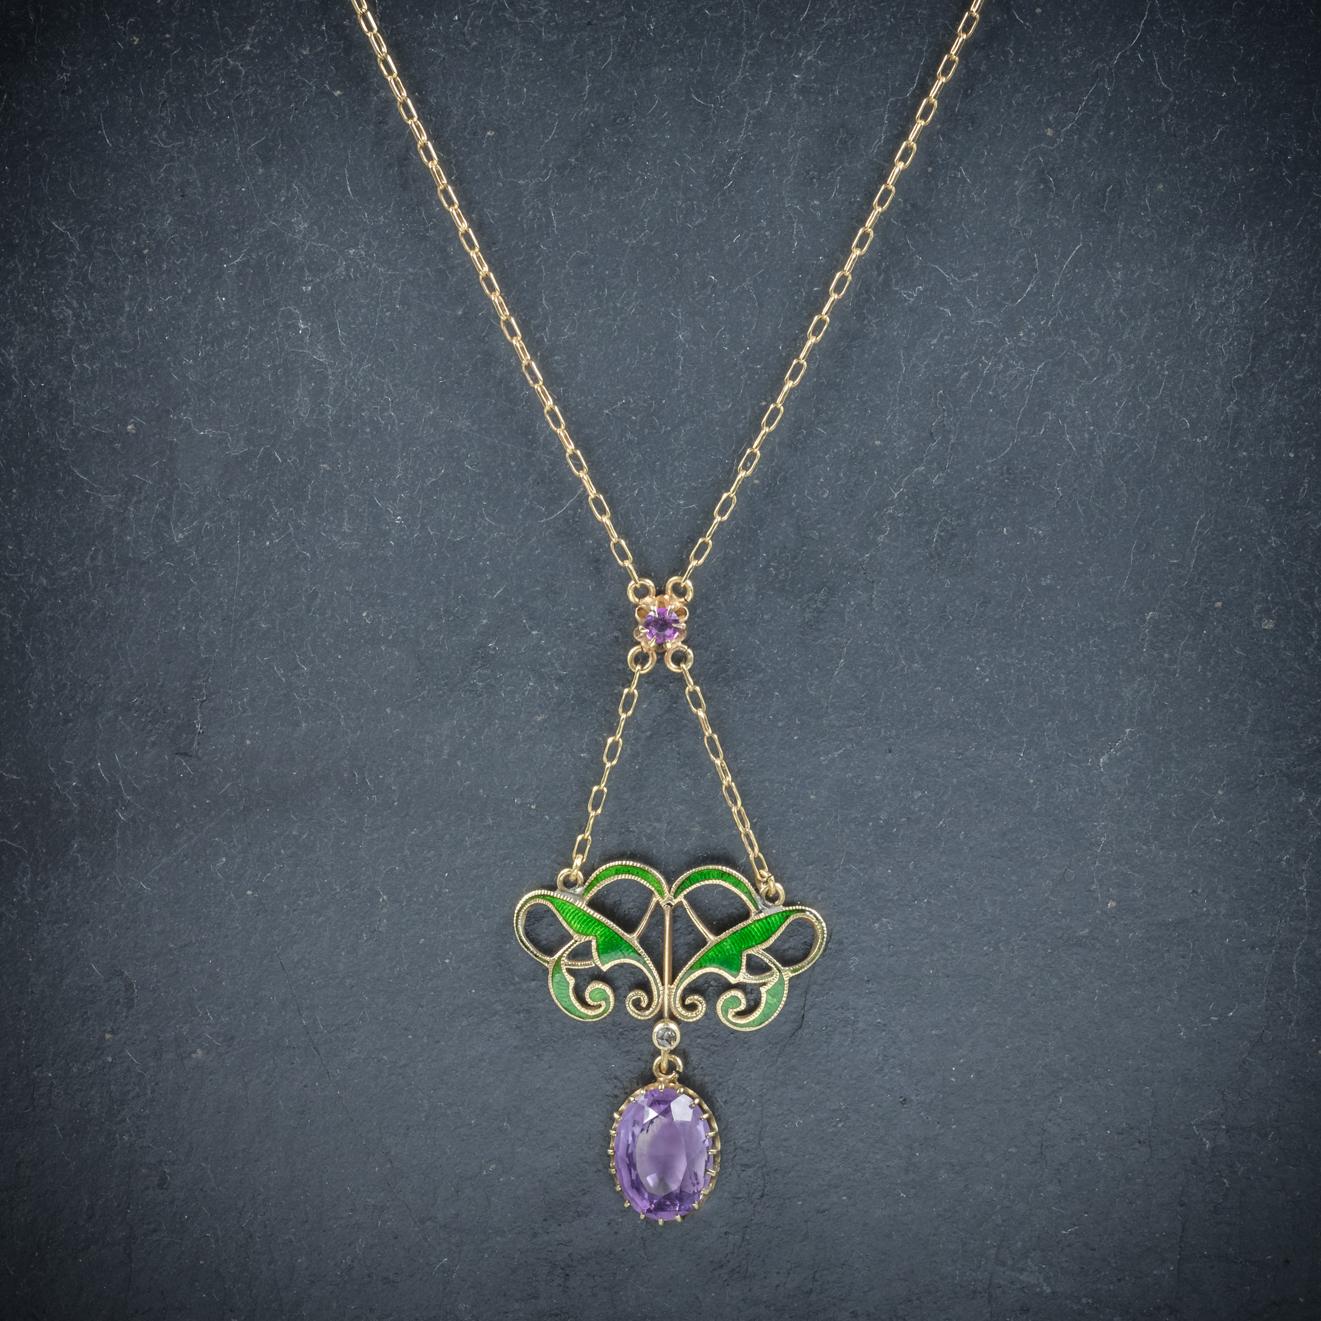 This beautiful antique Victorian pendant necklace was made representing the Suffragette movement, Circa 1900

The pendant and chain are set in 15ct Yellow Gold with pretty green Enamel colouring across the gallery

The drop pendant is also adorned